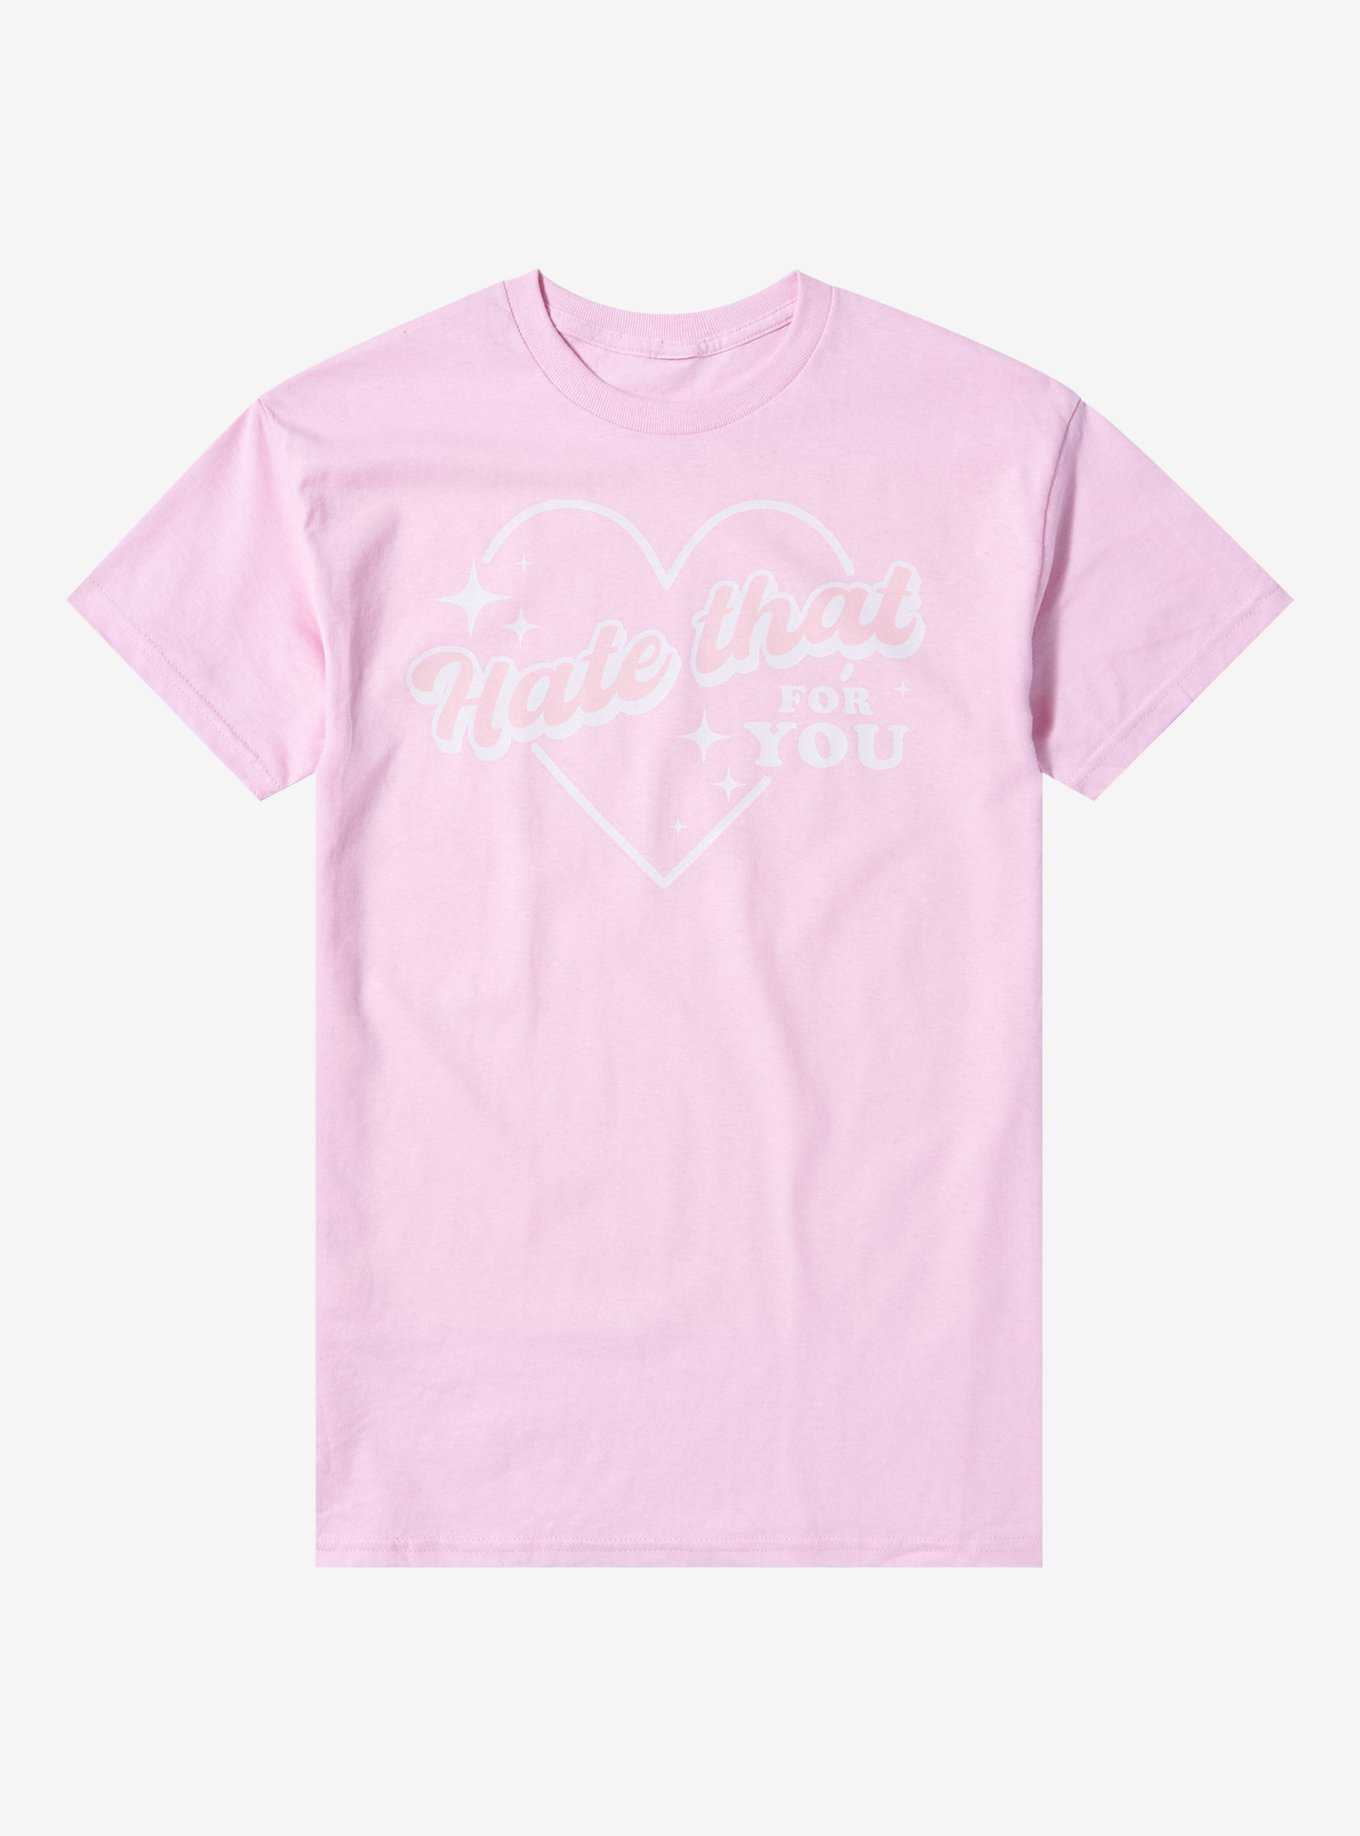 Hate That For You Boyfriend Fit Girls T-Shirt, , hi-res